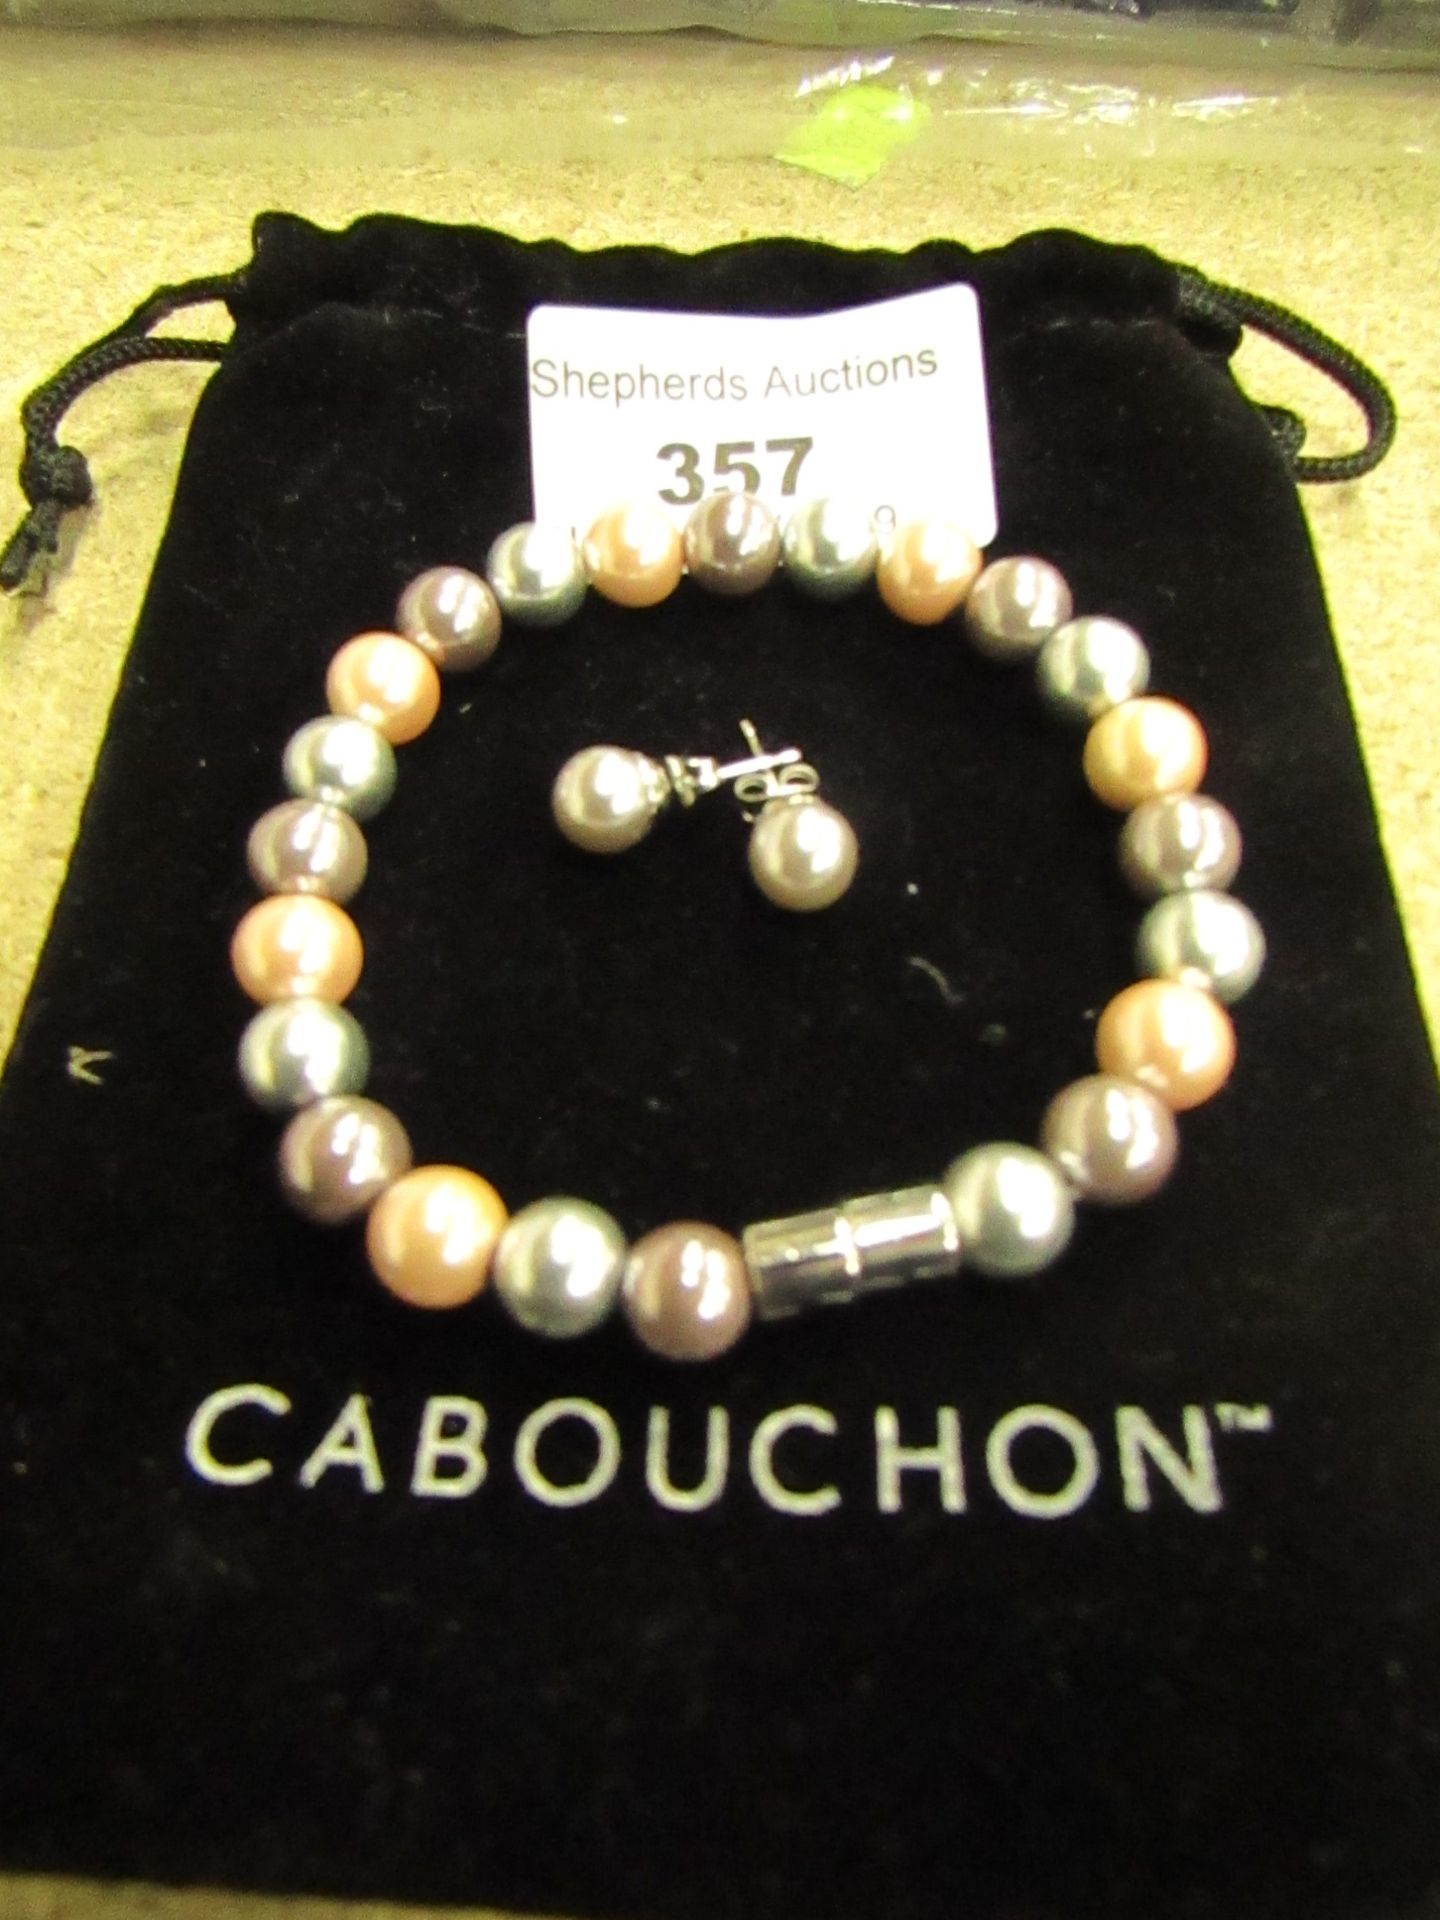 Cabouchon Magnetic Bracelet & Matching Earrings new in Black Pouch